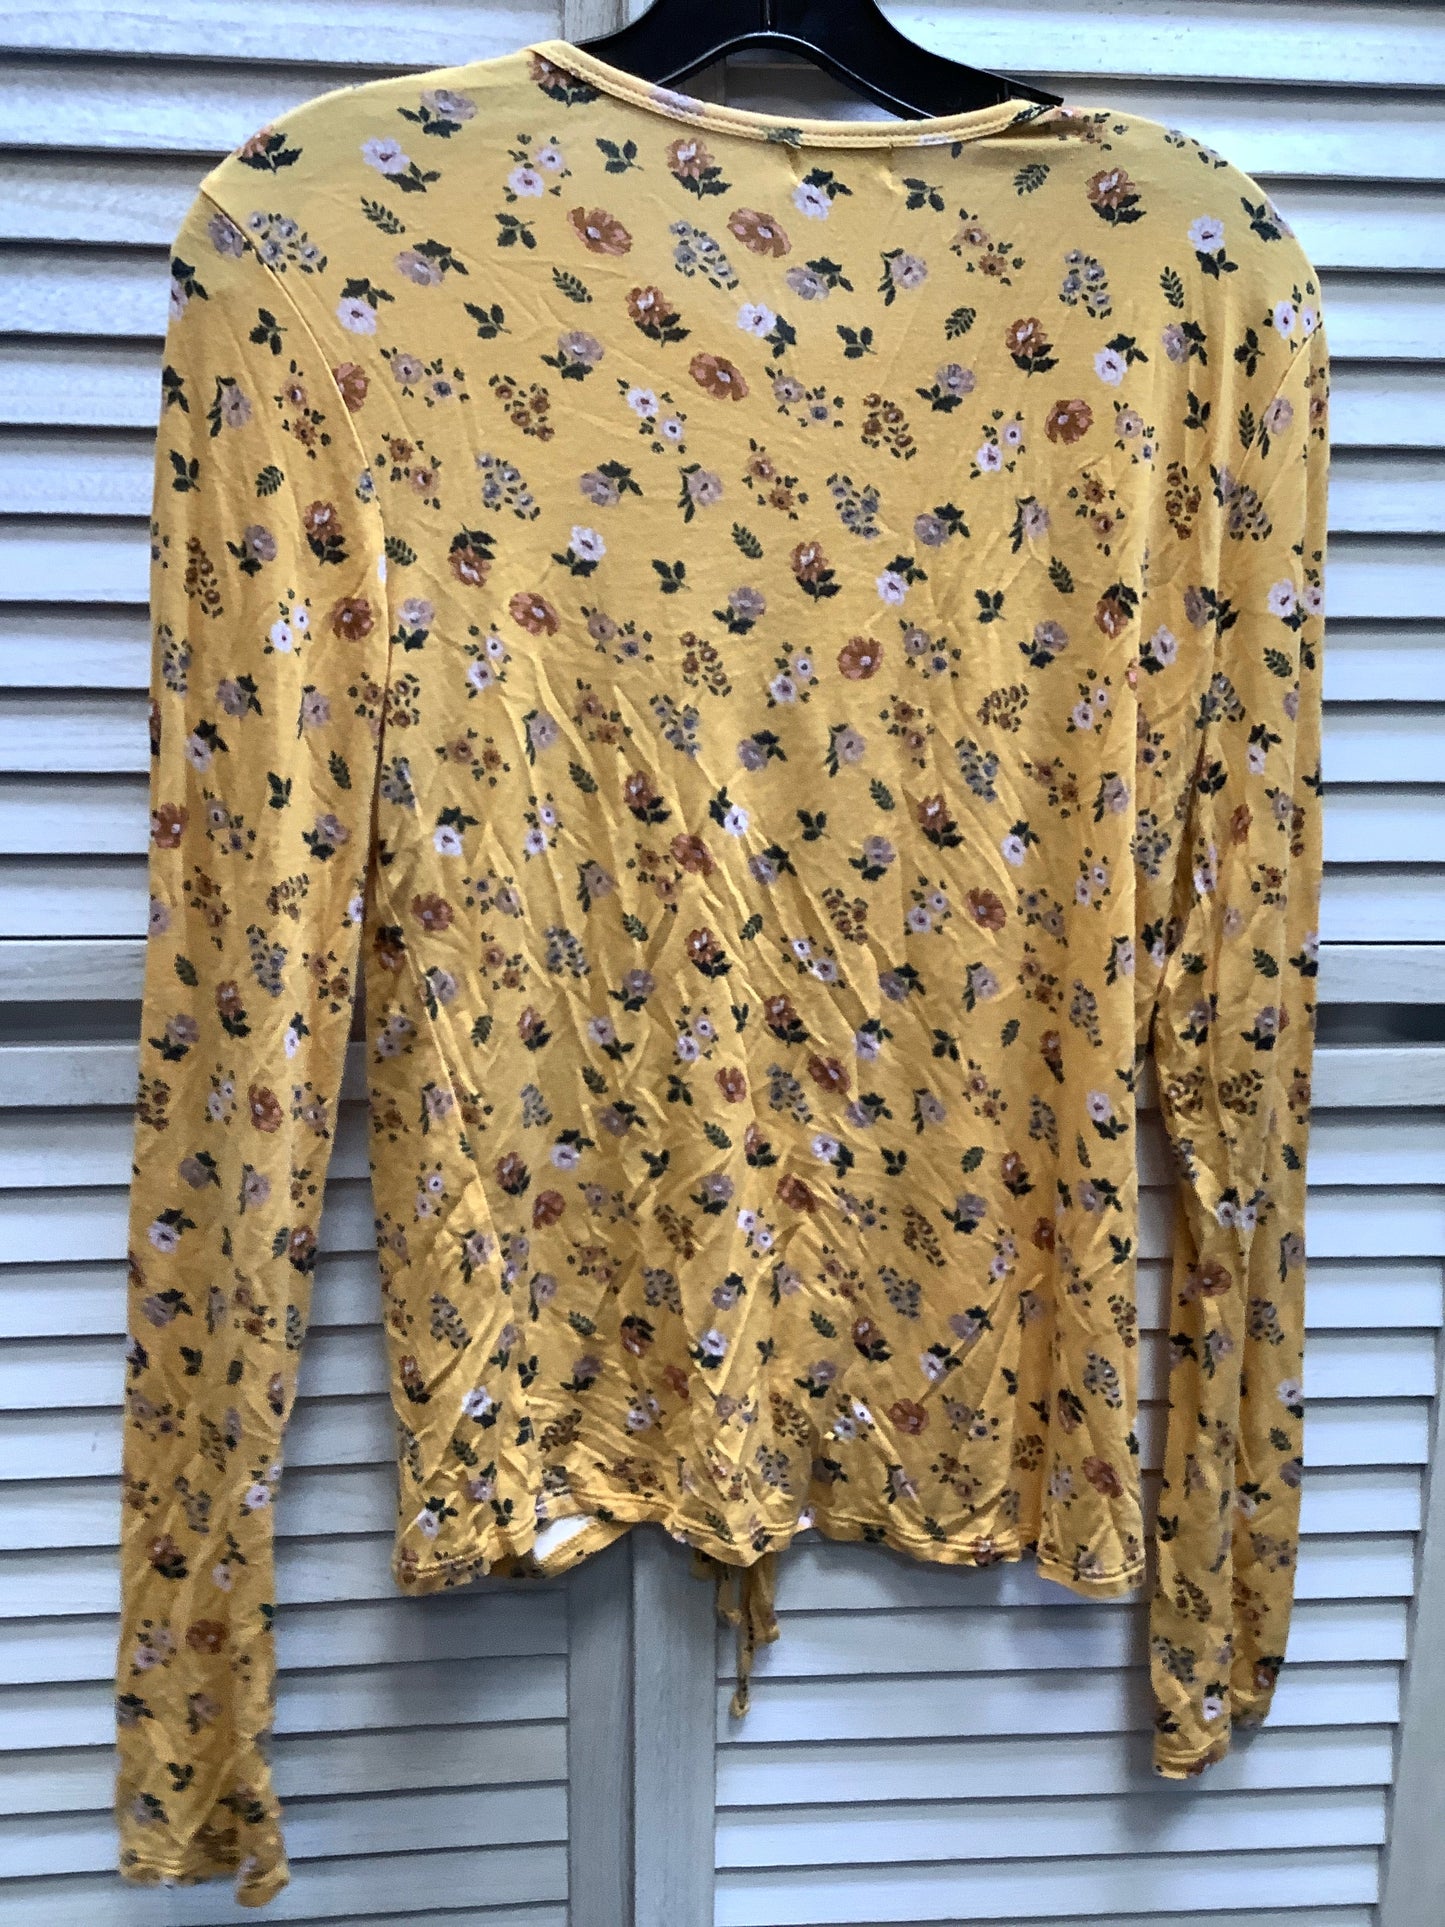 Floral Print Top Long Sleeve Basic Love Fire, Size S